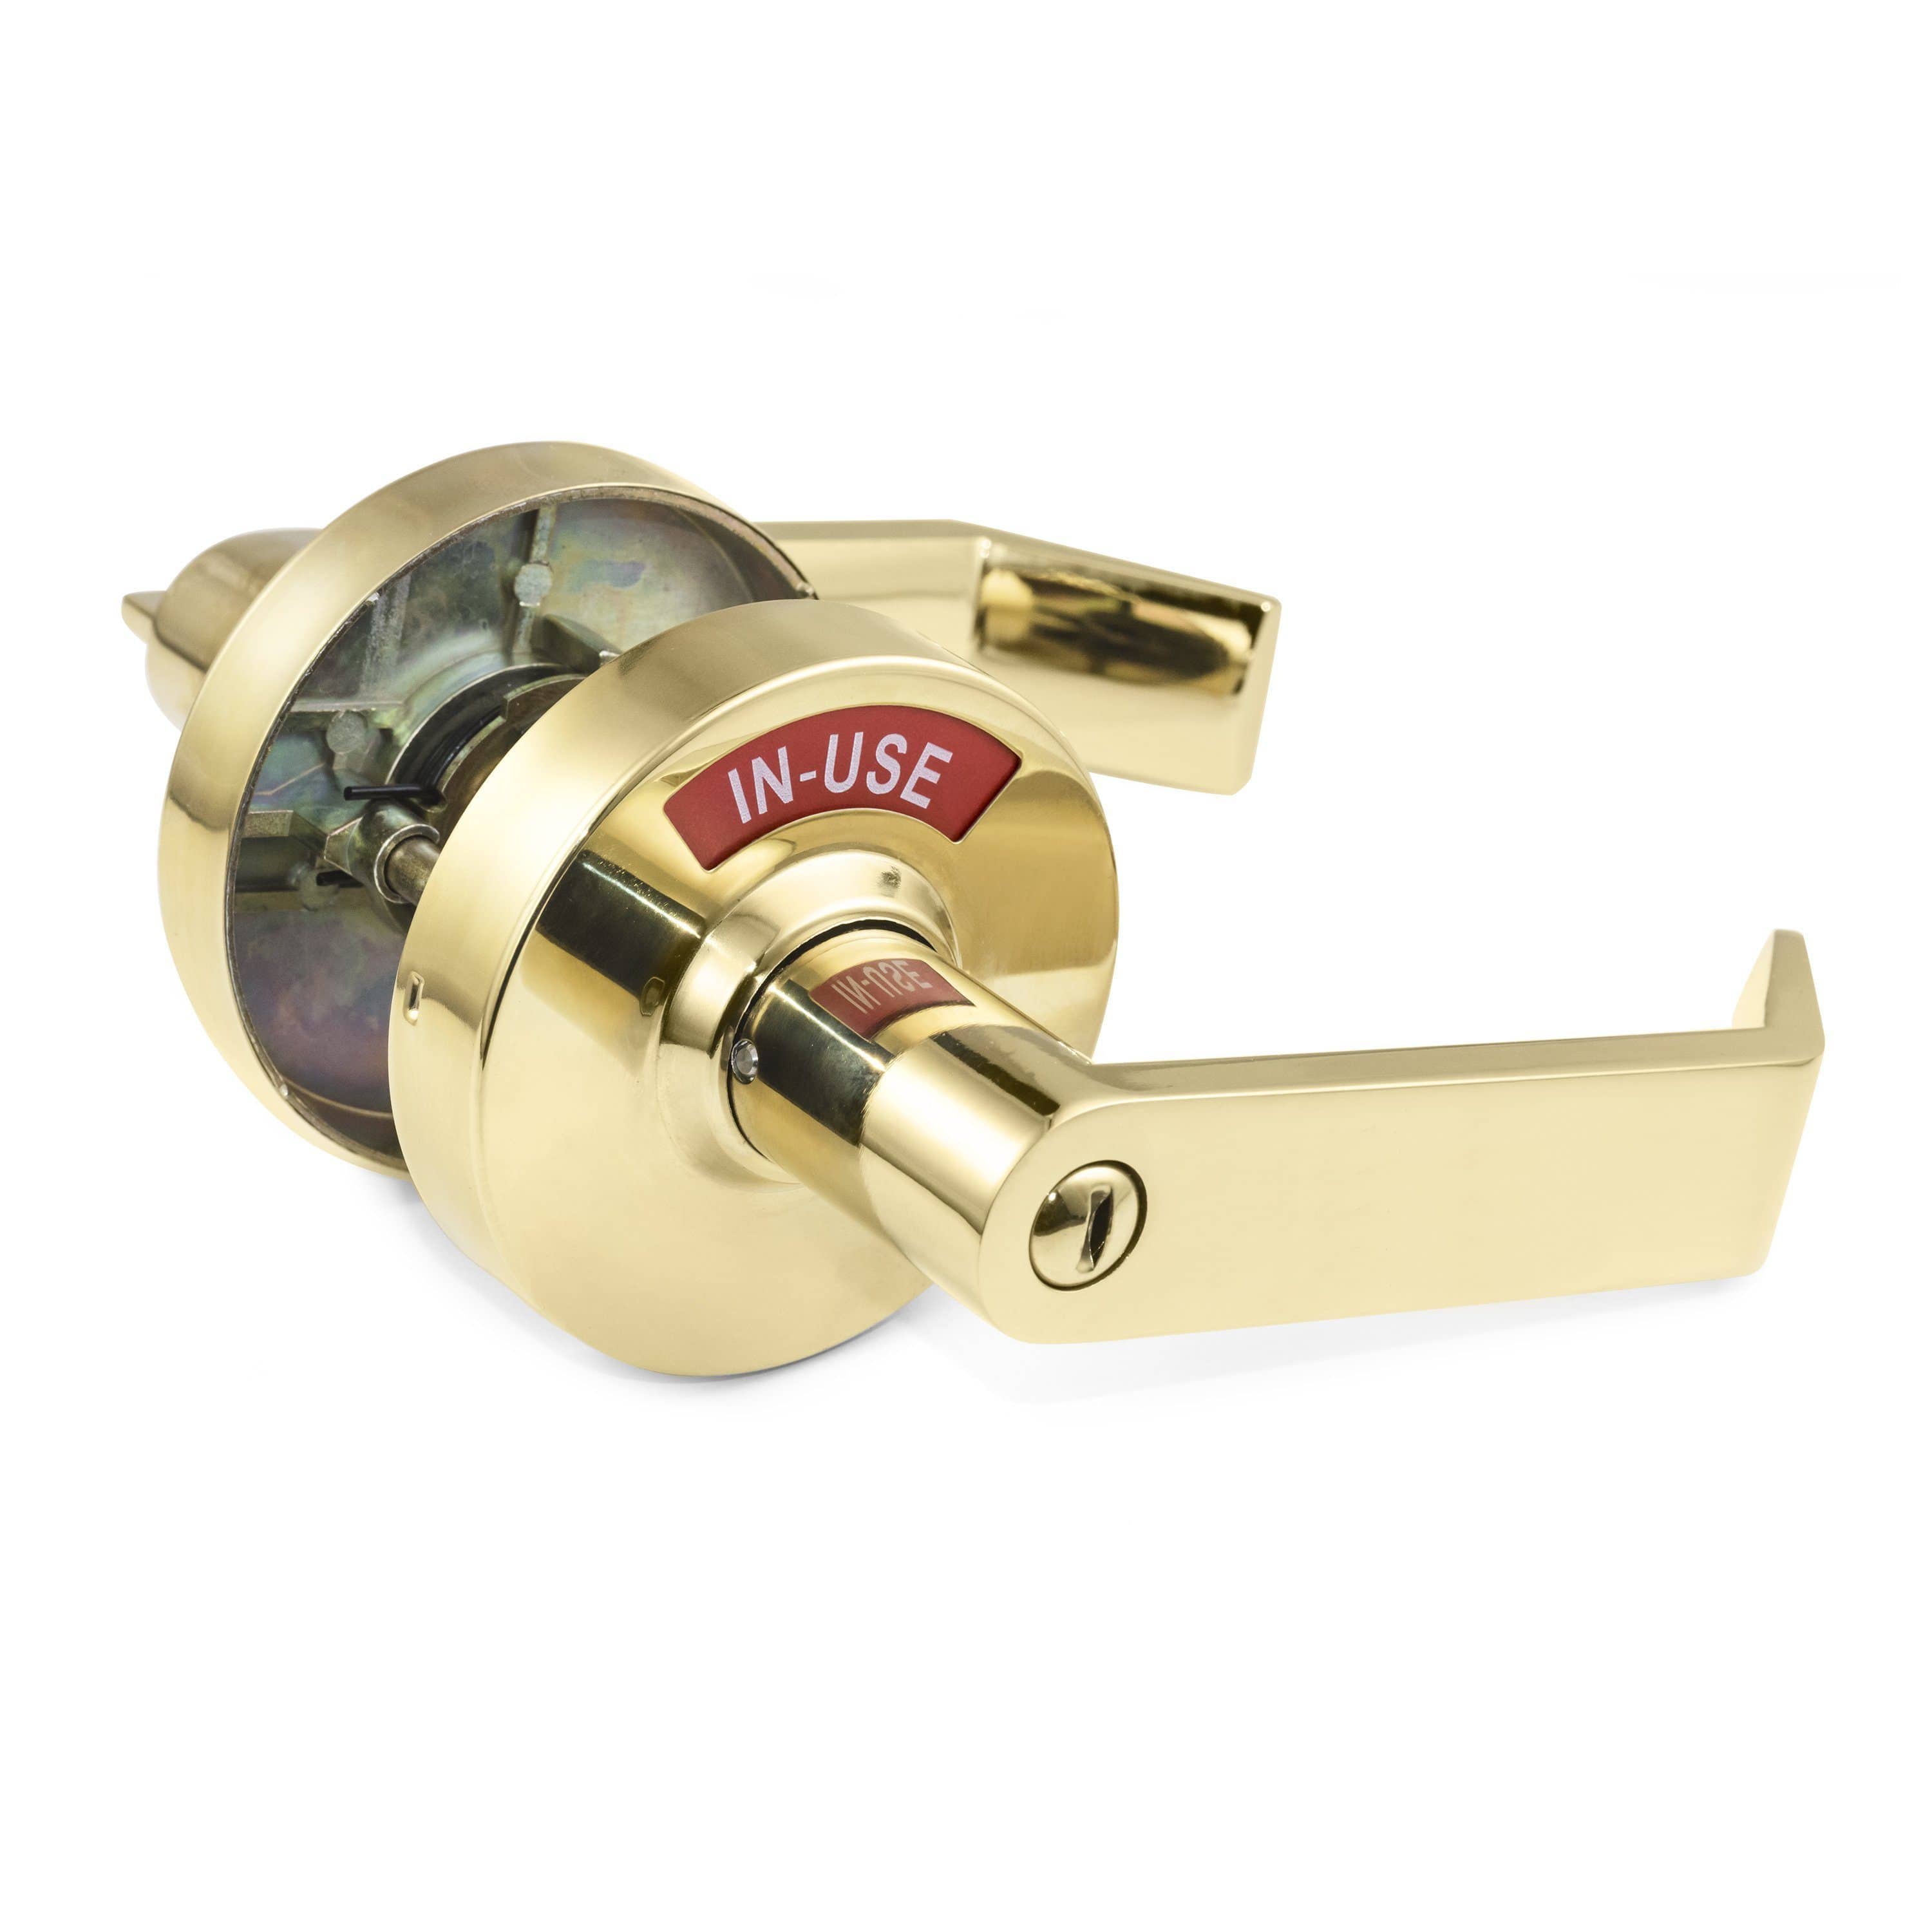 Privacy Lock with Occupancy Indicator in Satin Chrome